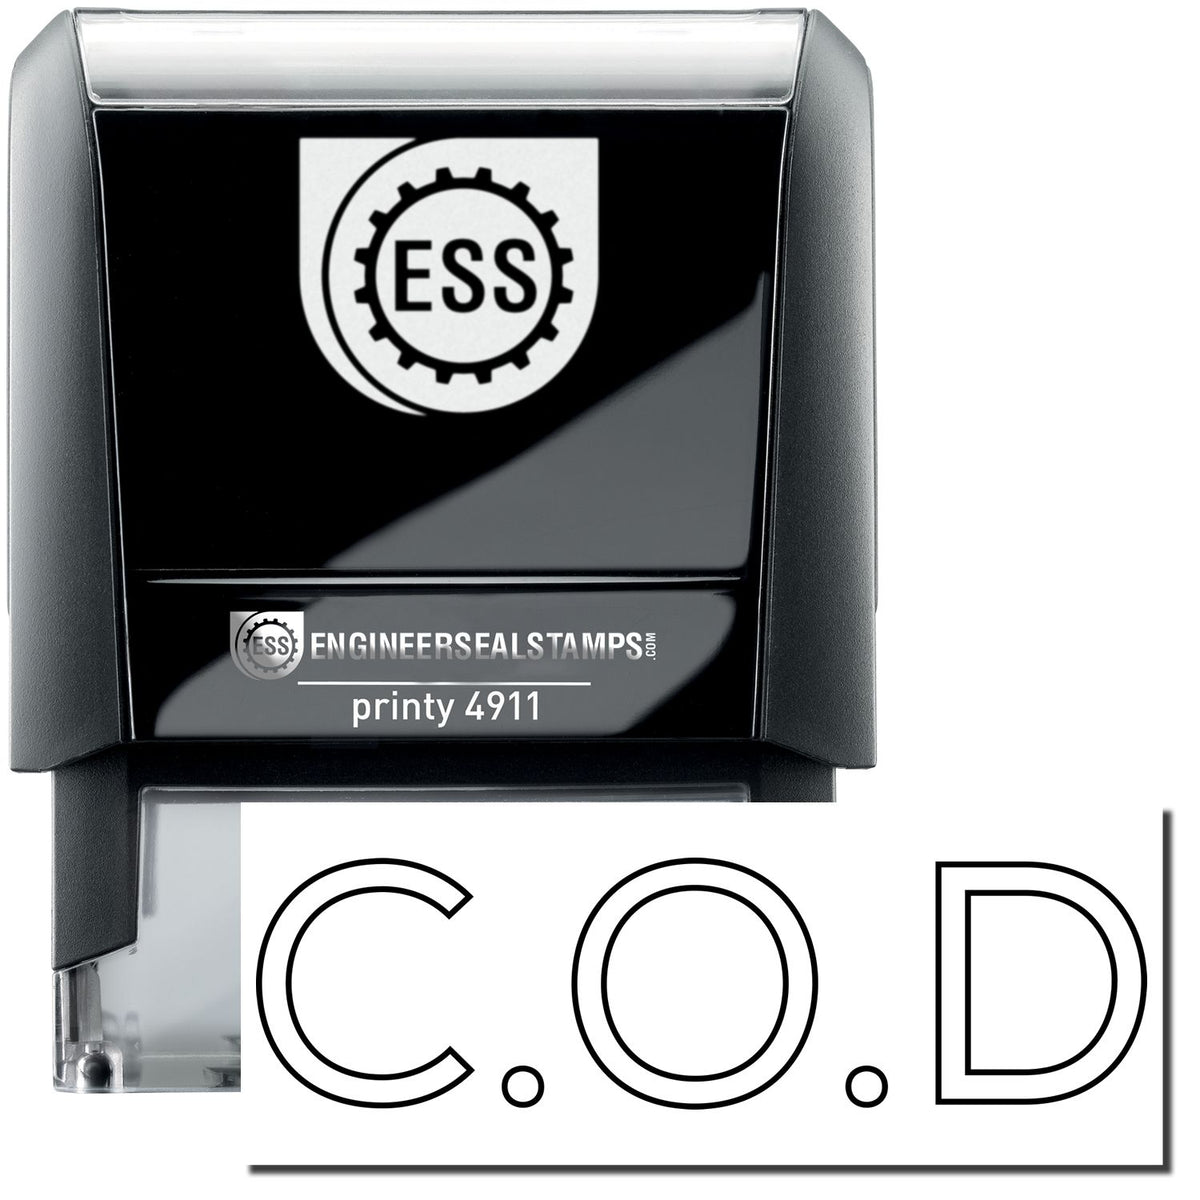 A self-inking stamp with a stamped image showing how the text &quot;C.O.D&quot; in an outline style is displayed after stamping.